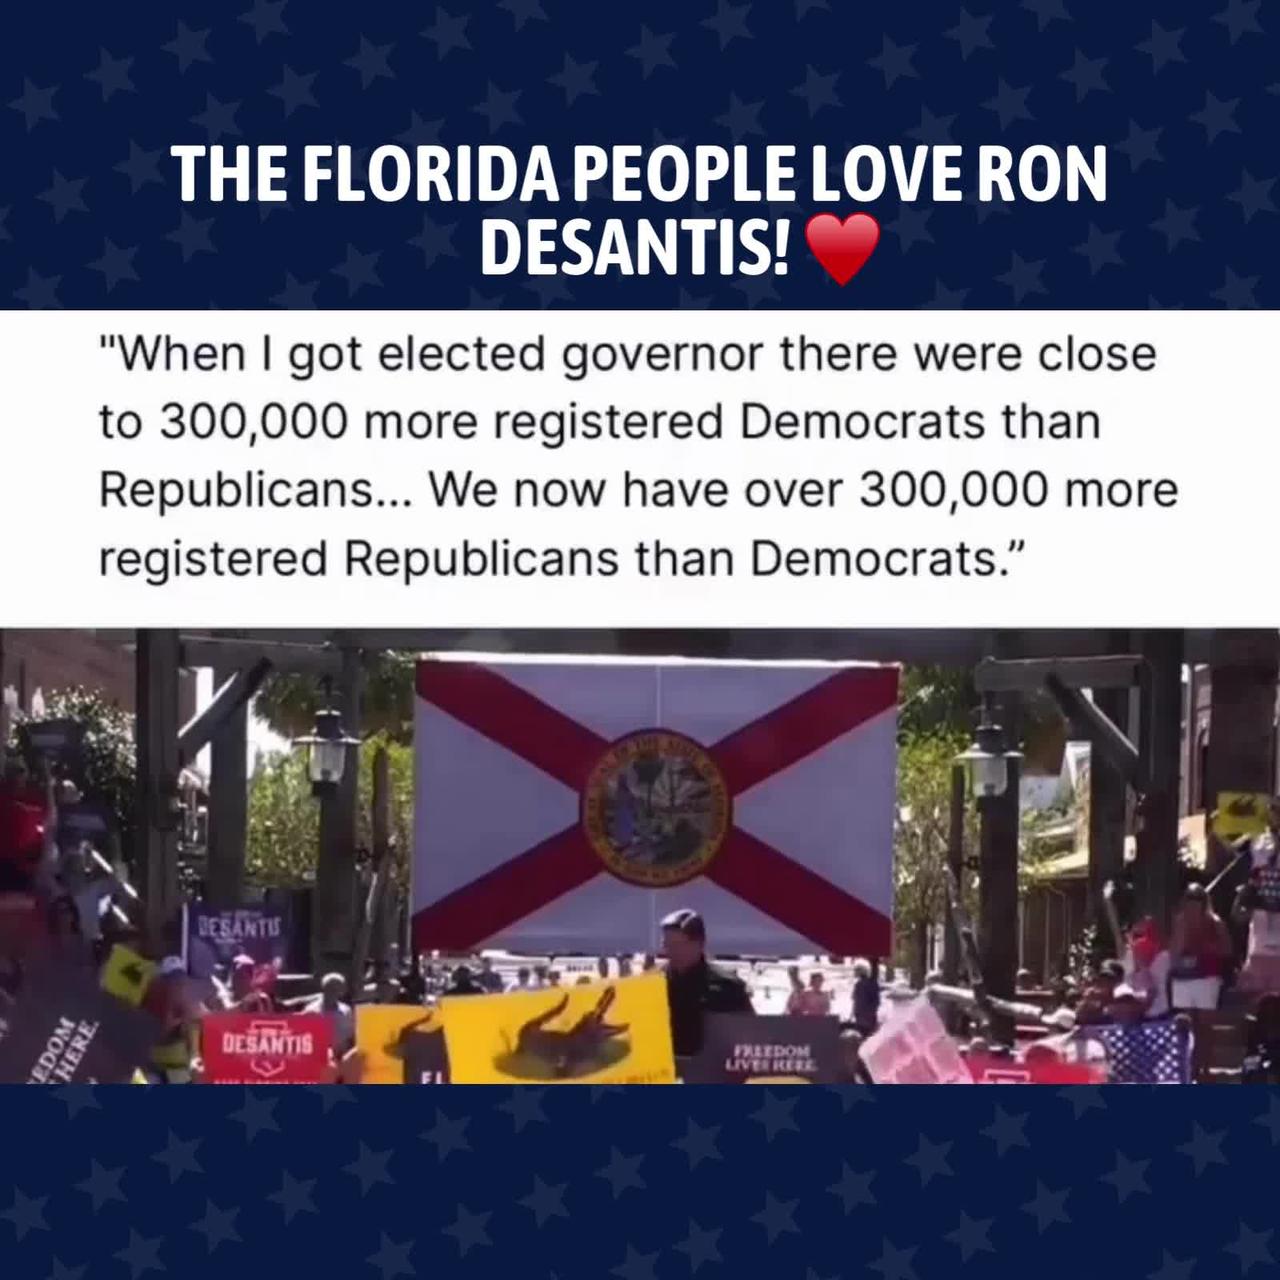 BREAKING: Ron DeSantis Just Made A Major Announcement About...